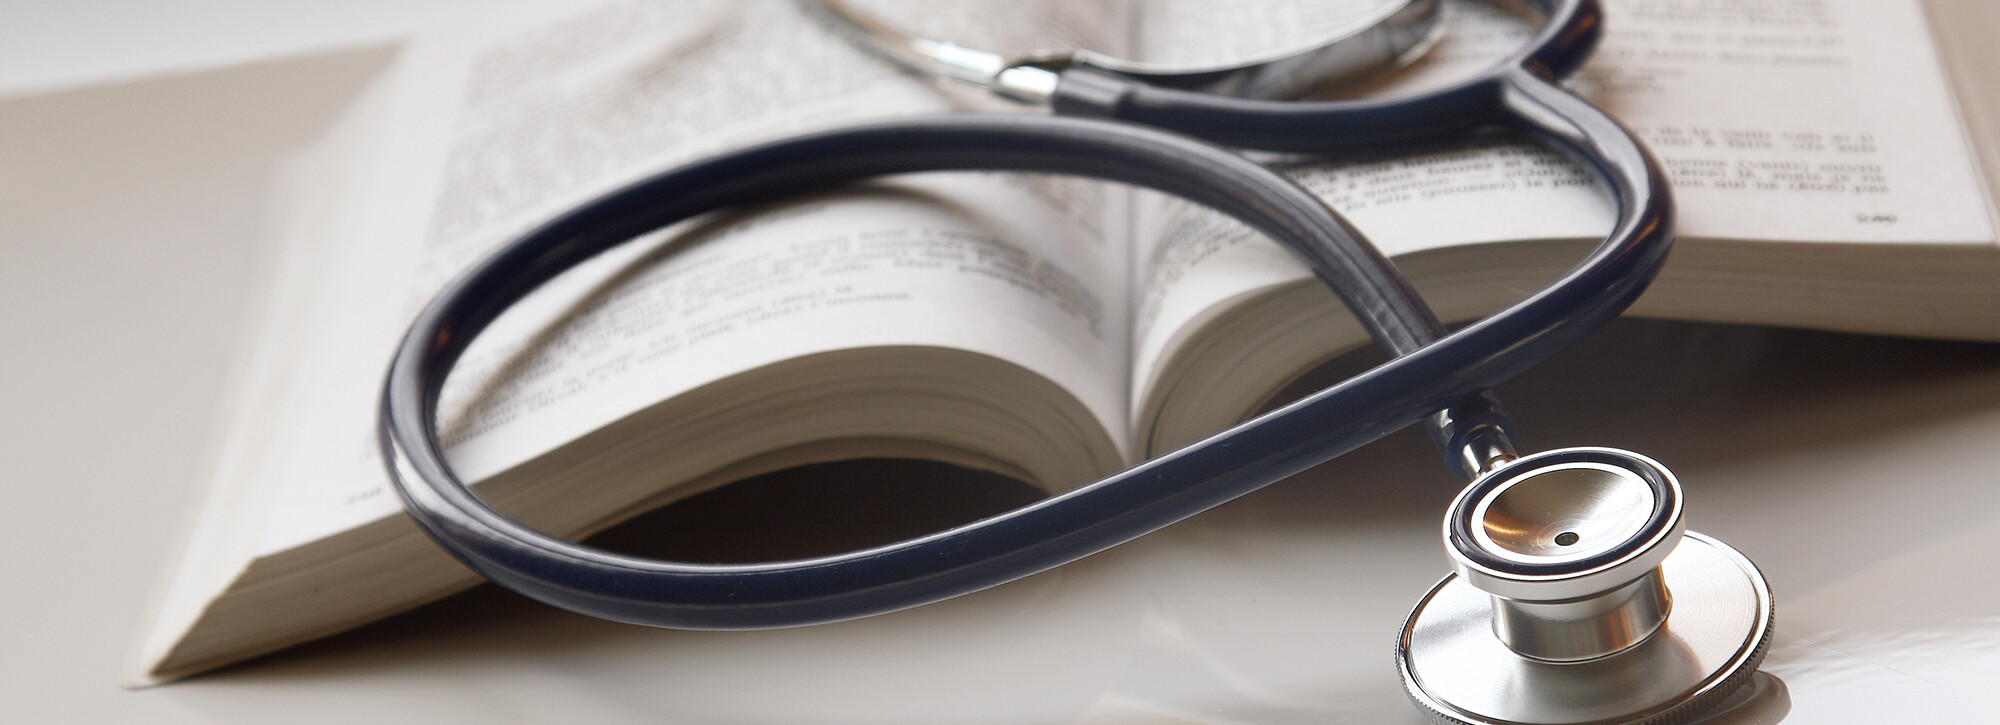 stethoscope and book